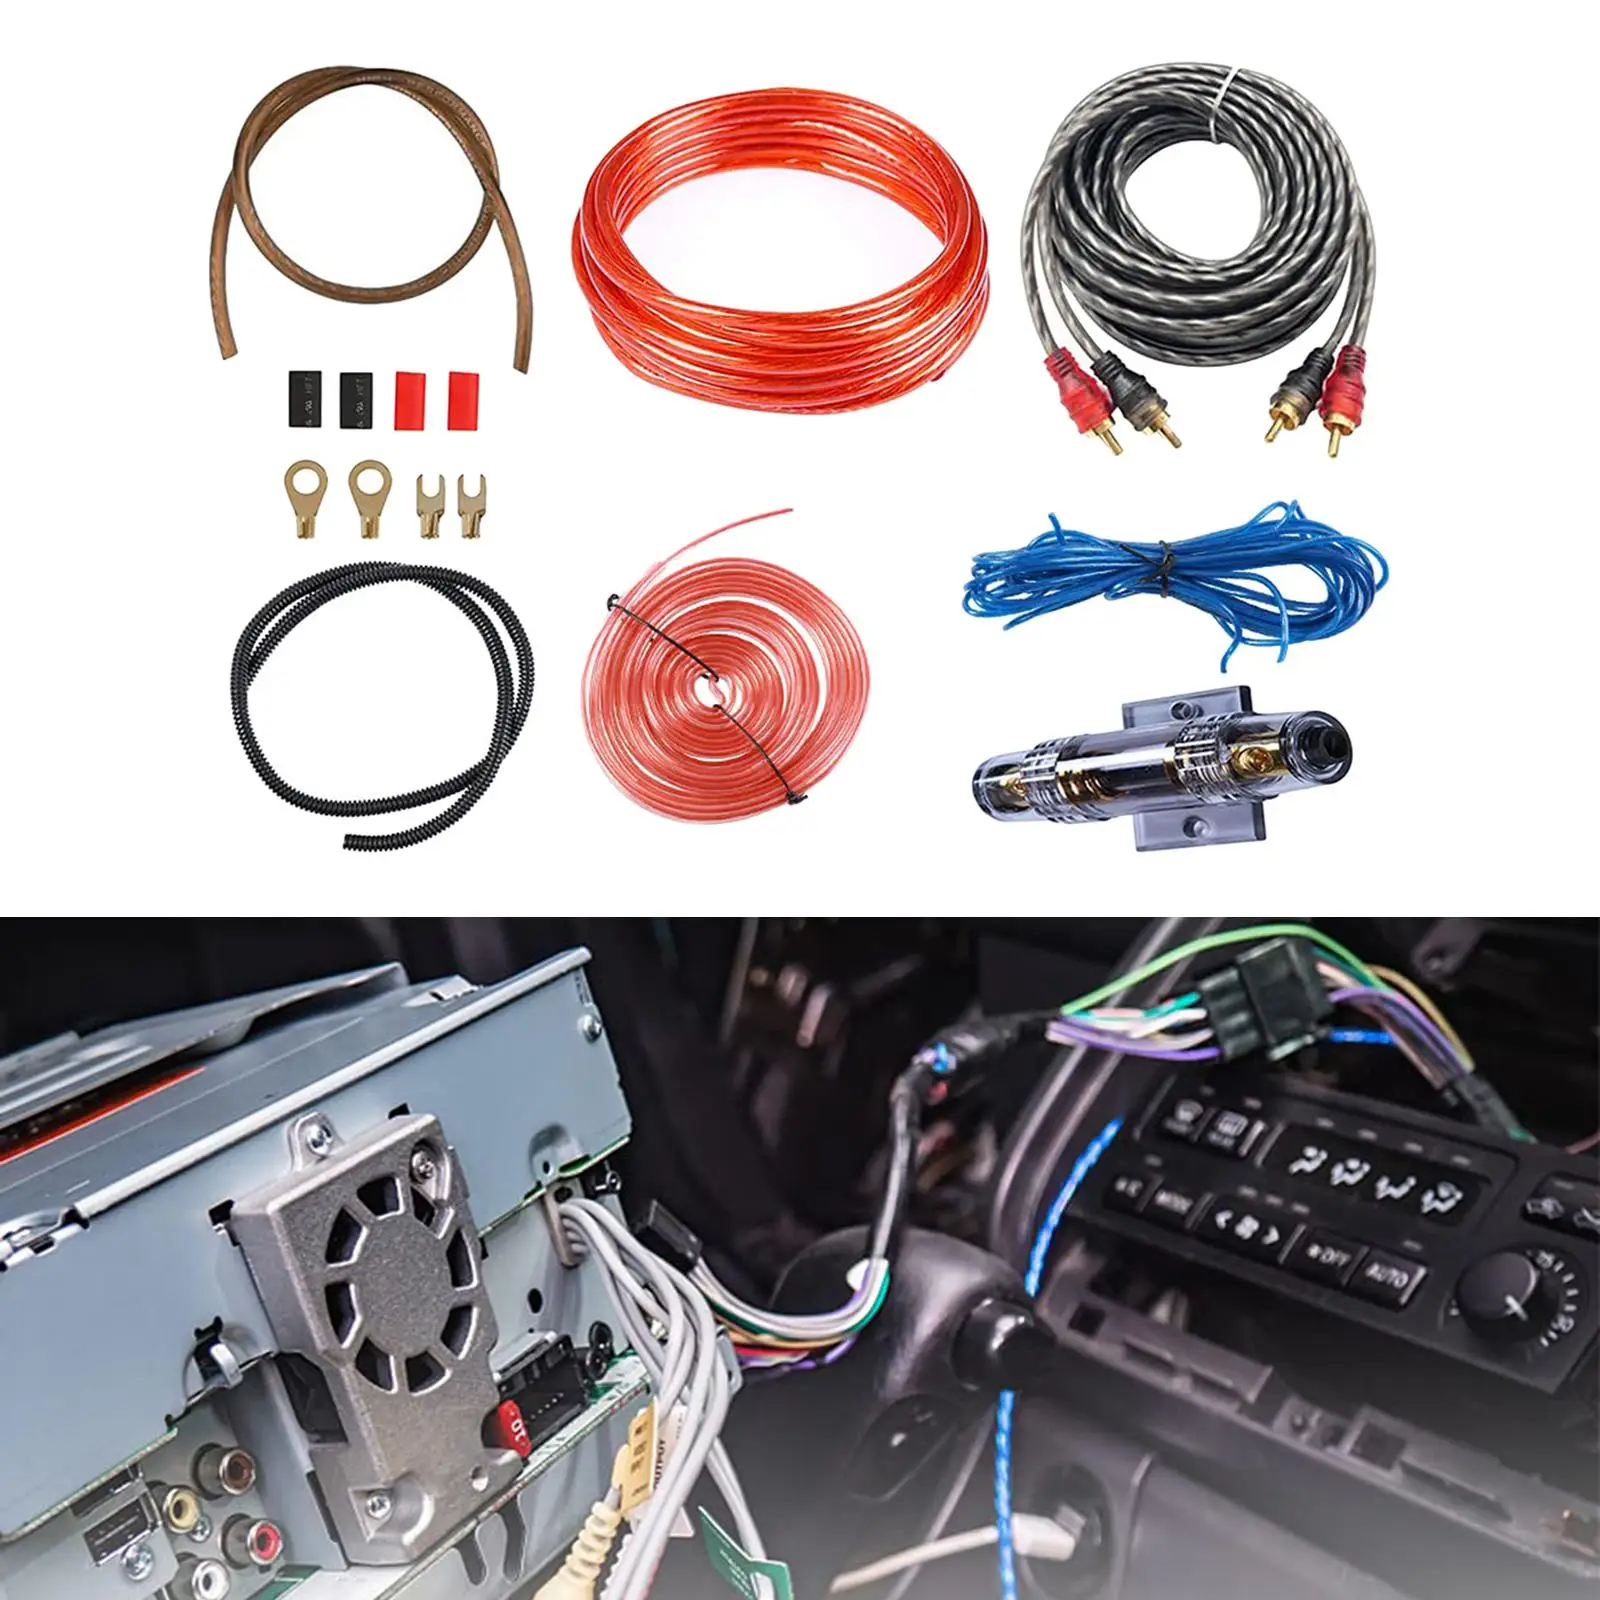 Car Audio Wire Wiring Kit, Amplifier Sound System Audio Cable Kit Car Power Cord